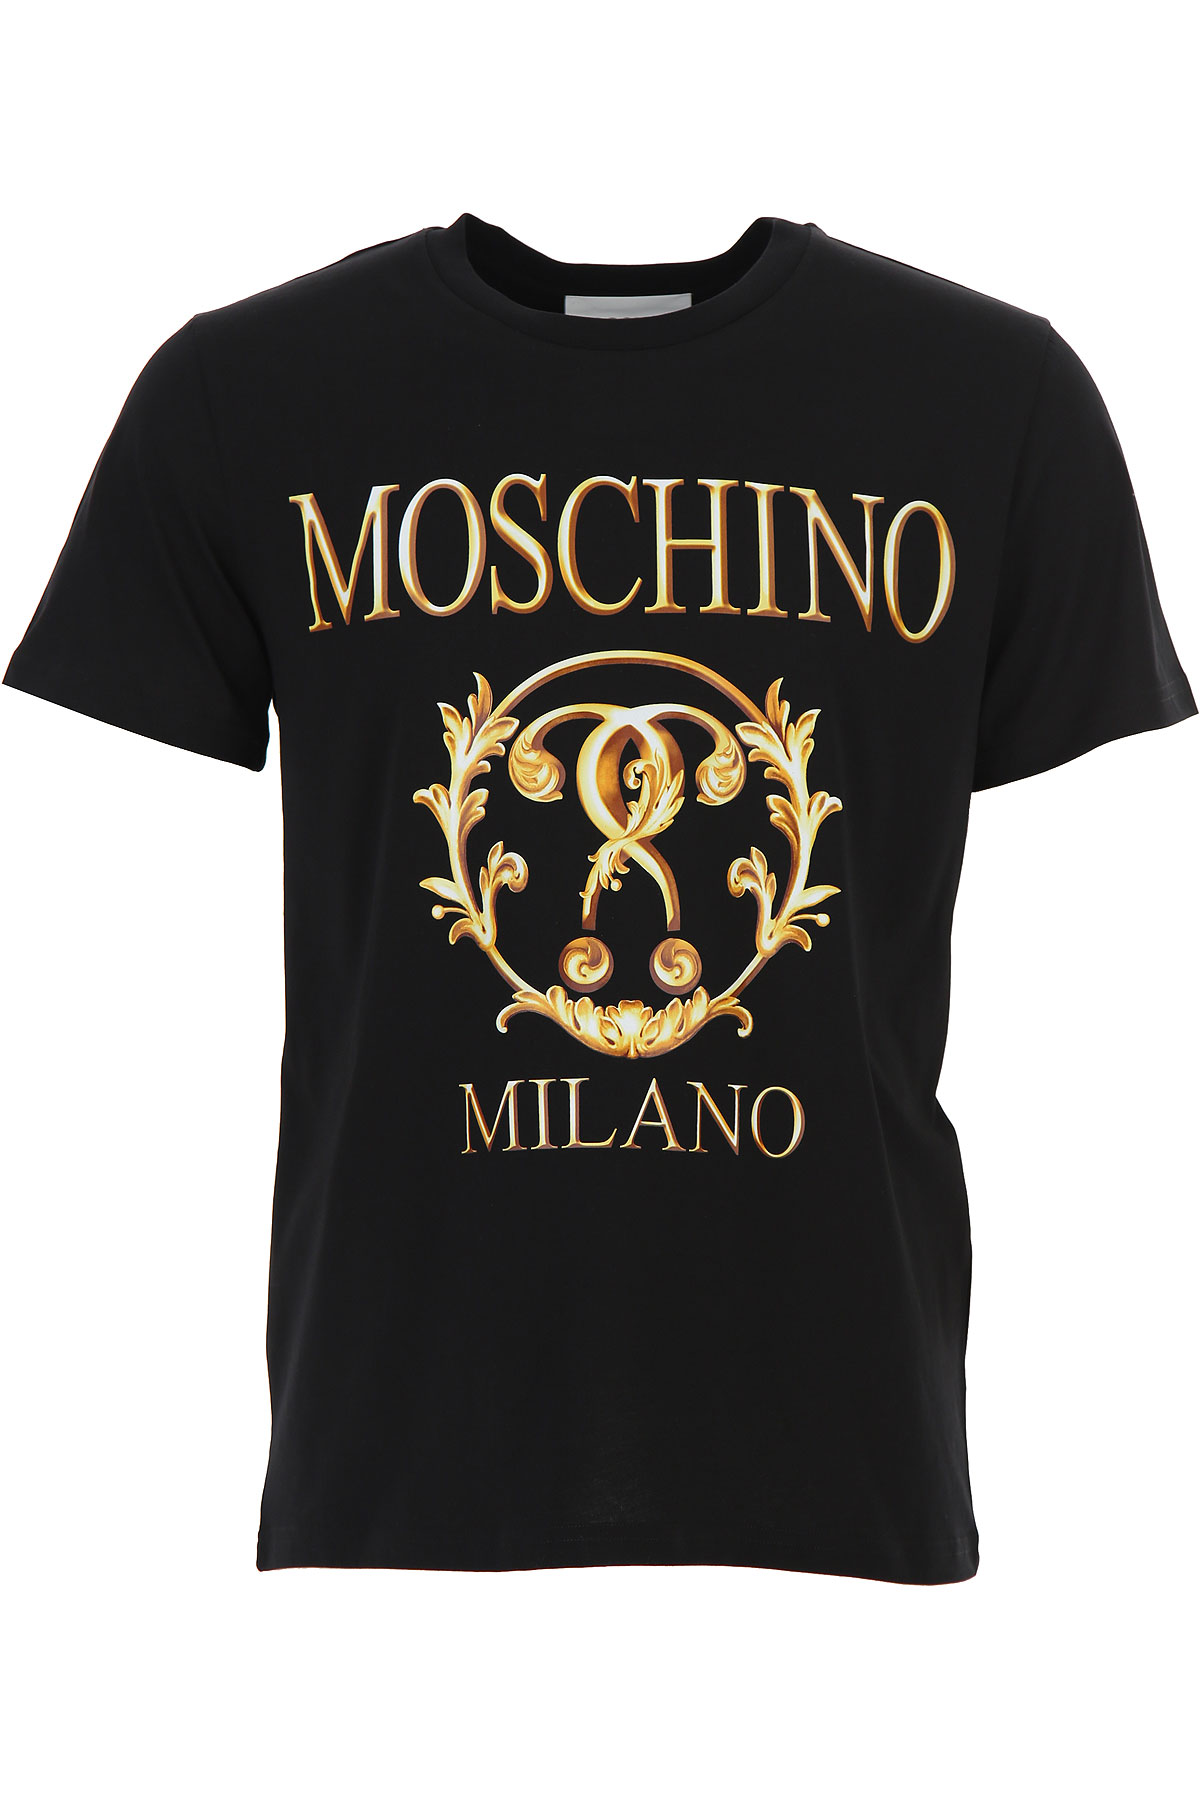 Mens Clothing Moschino, Style code: a0720-5240-1555